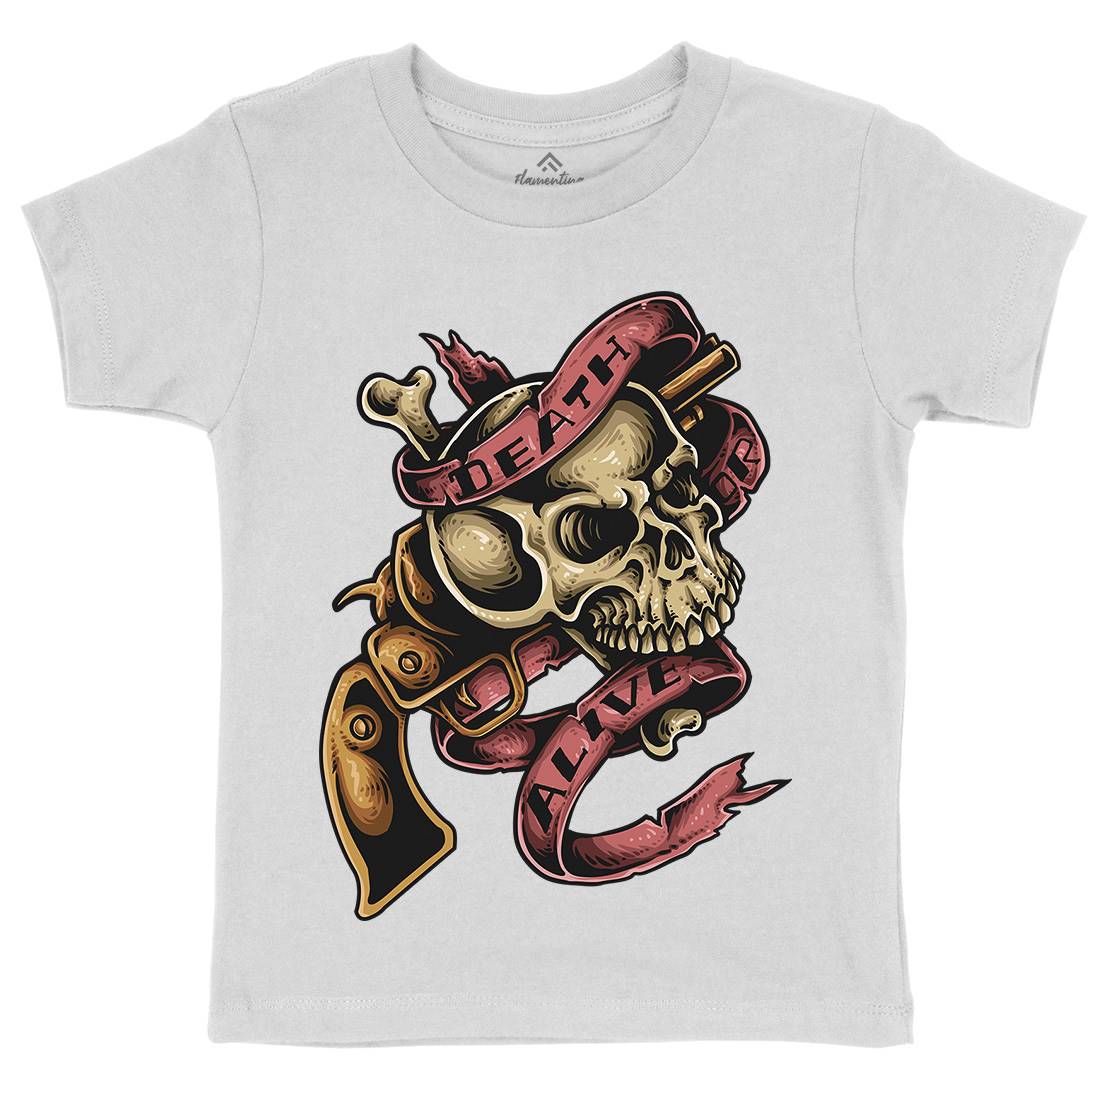 Death Or Alive Kids Crew Neck T-Shirt Navy A416